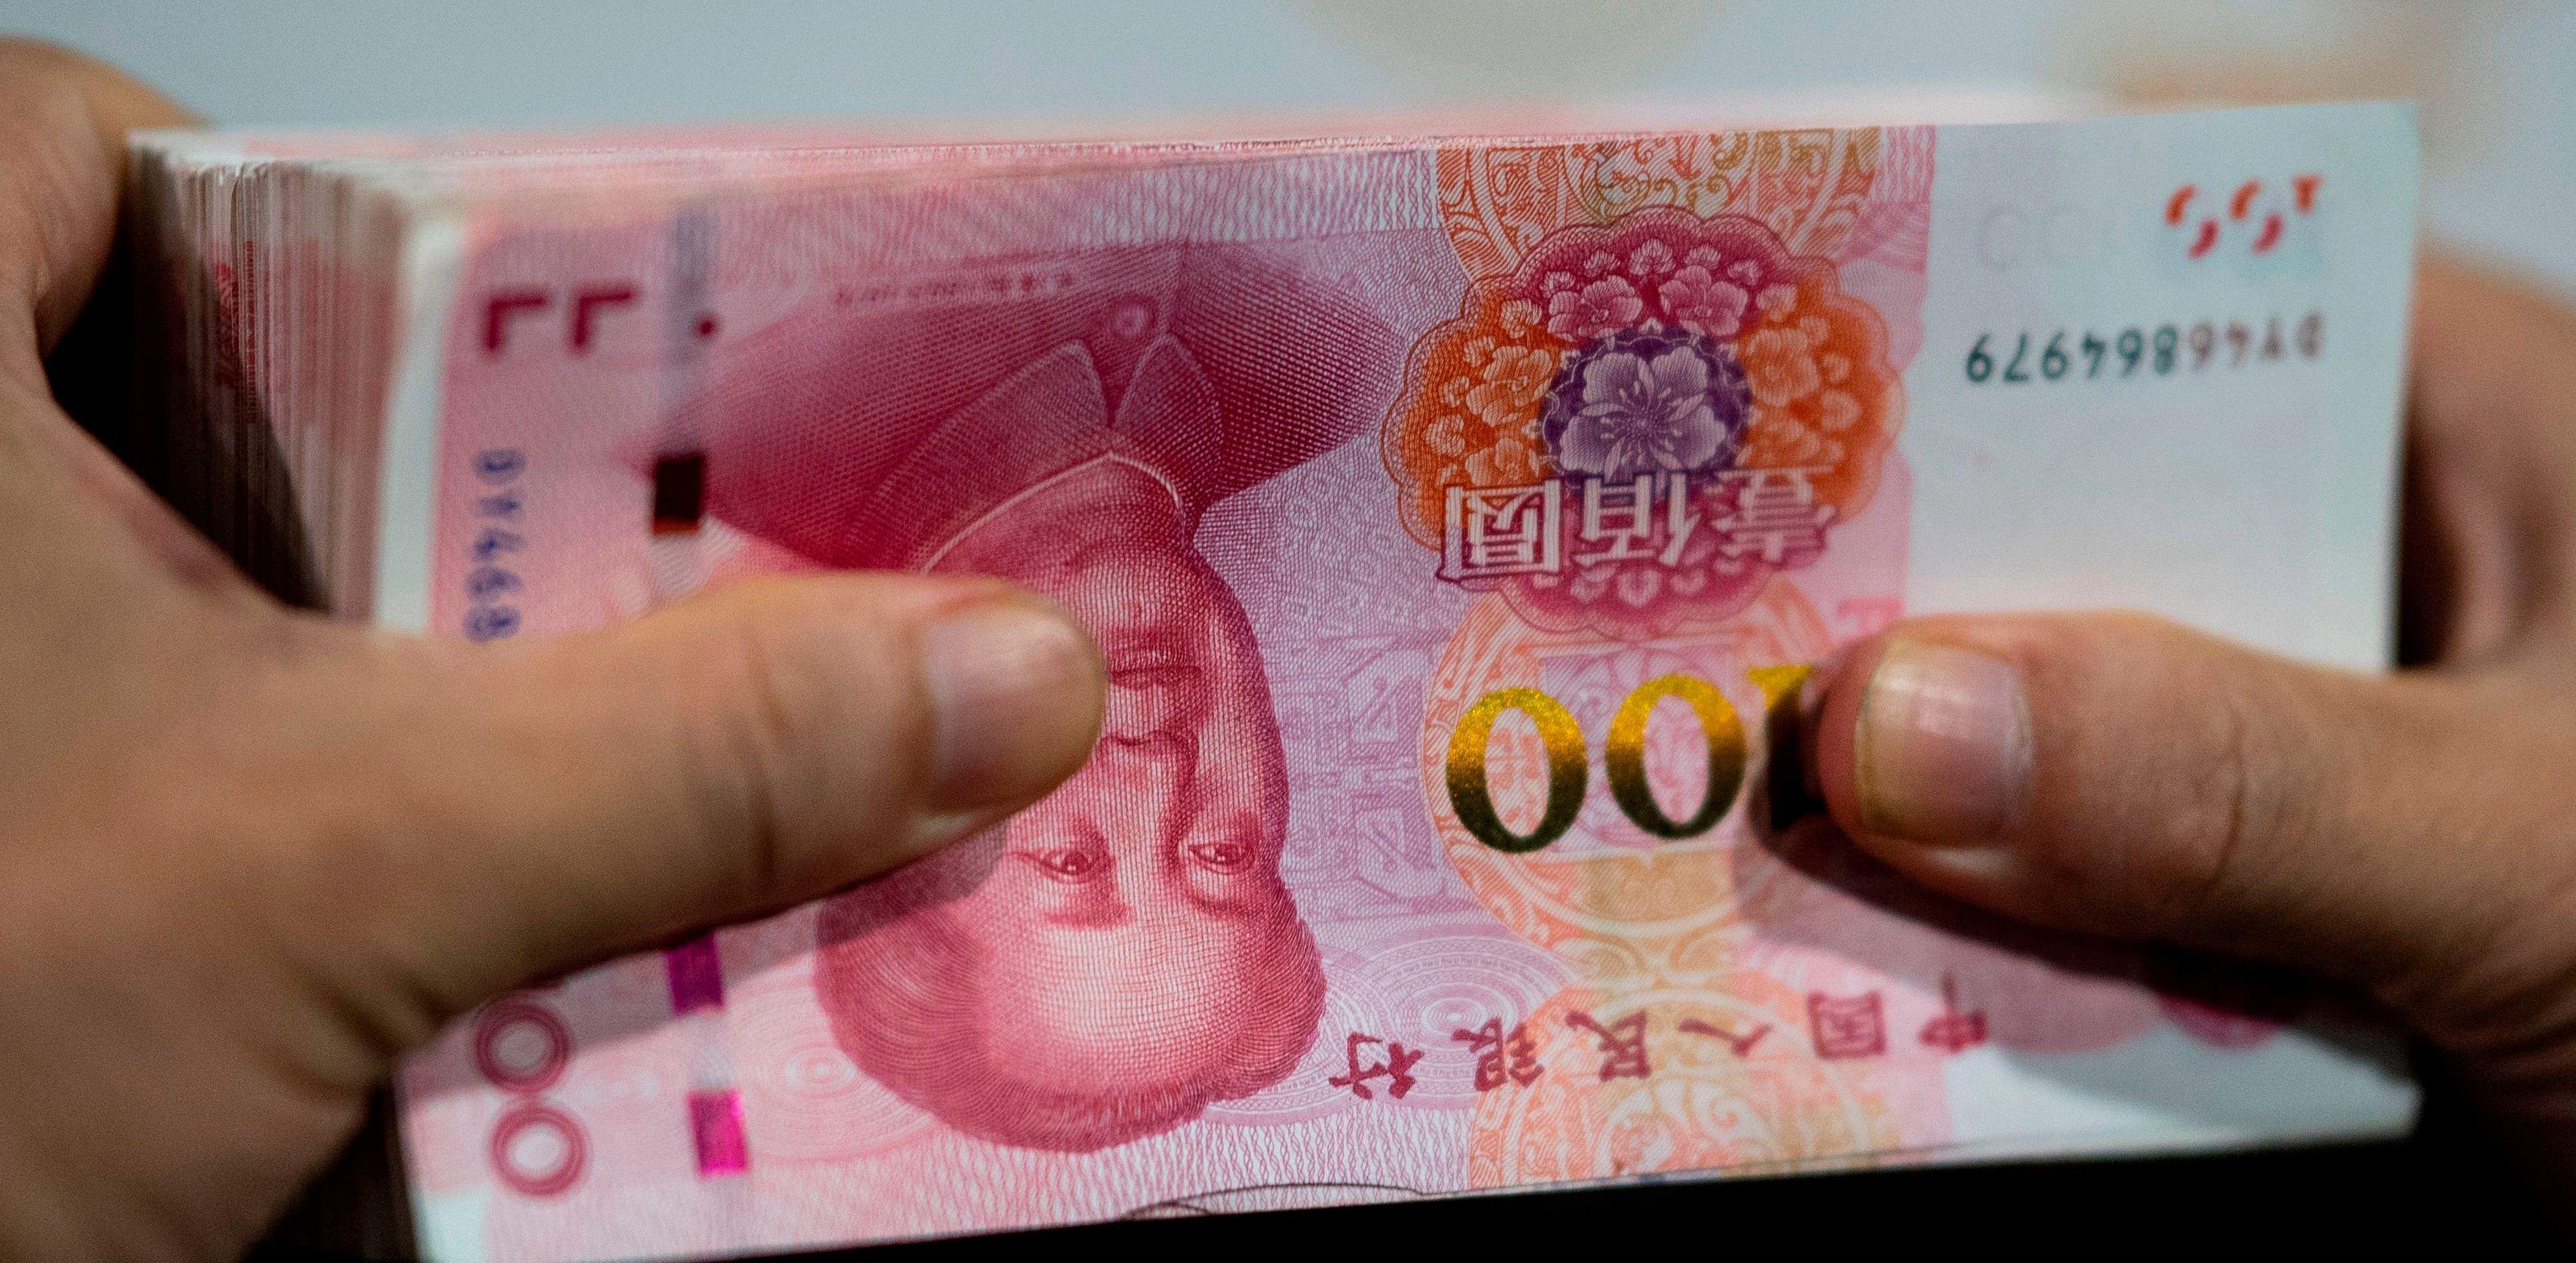 While China over the years has made some progress -- promoting offshore yuan trading, winning official reserve-currency status from the International Monetary Fund and introducing commodity contracts priced in yuan -- the yuan, also called the renminbi, is a small player on the global stage, with 2% market share. Credit: AFP